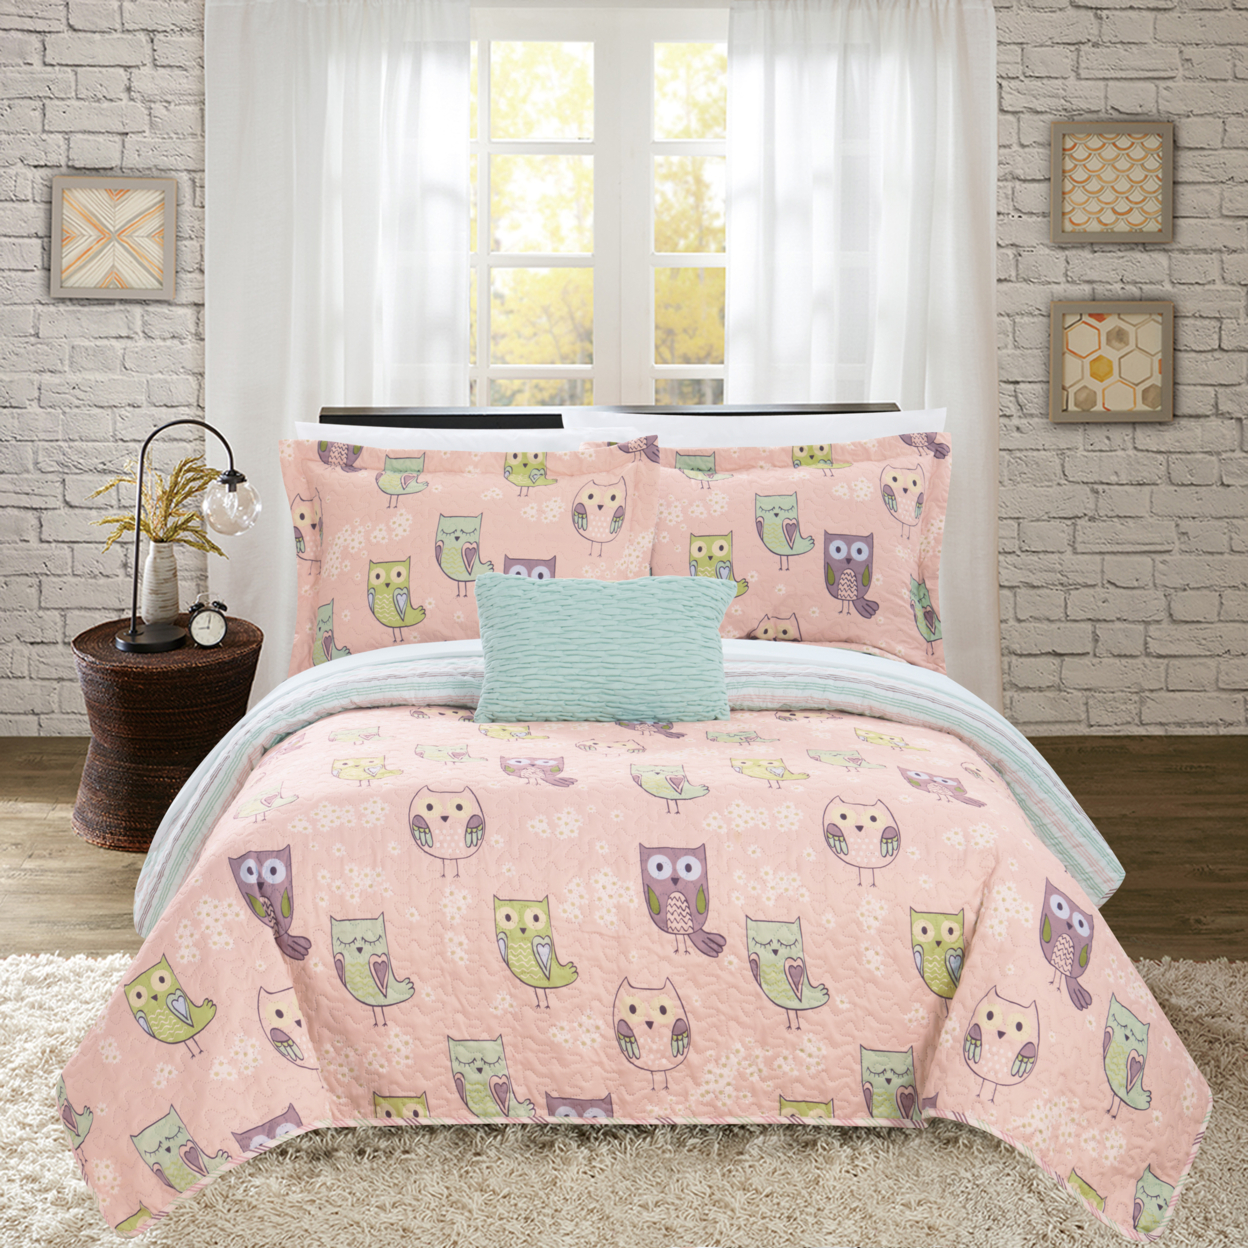 Owl Farm 4 Piece Reversible Quilt Set Cute It's A Hoot Owl Friends Youth Design Bed In A Bag - Grey, Full